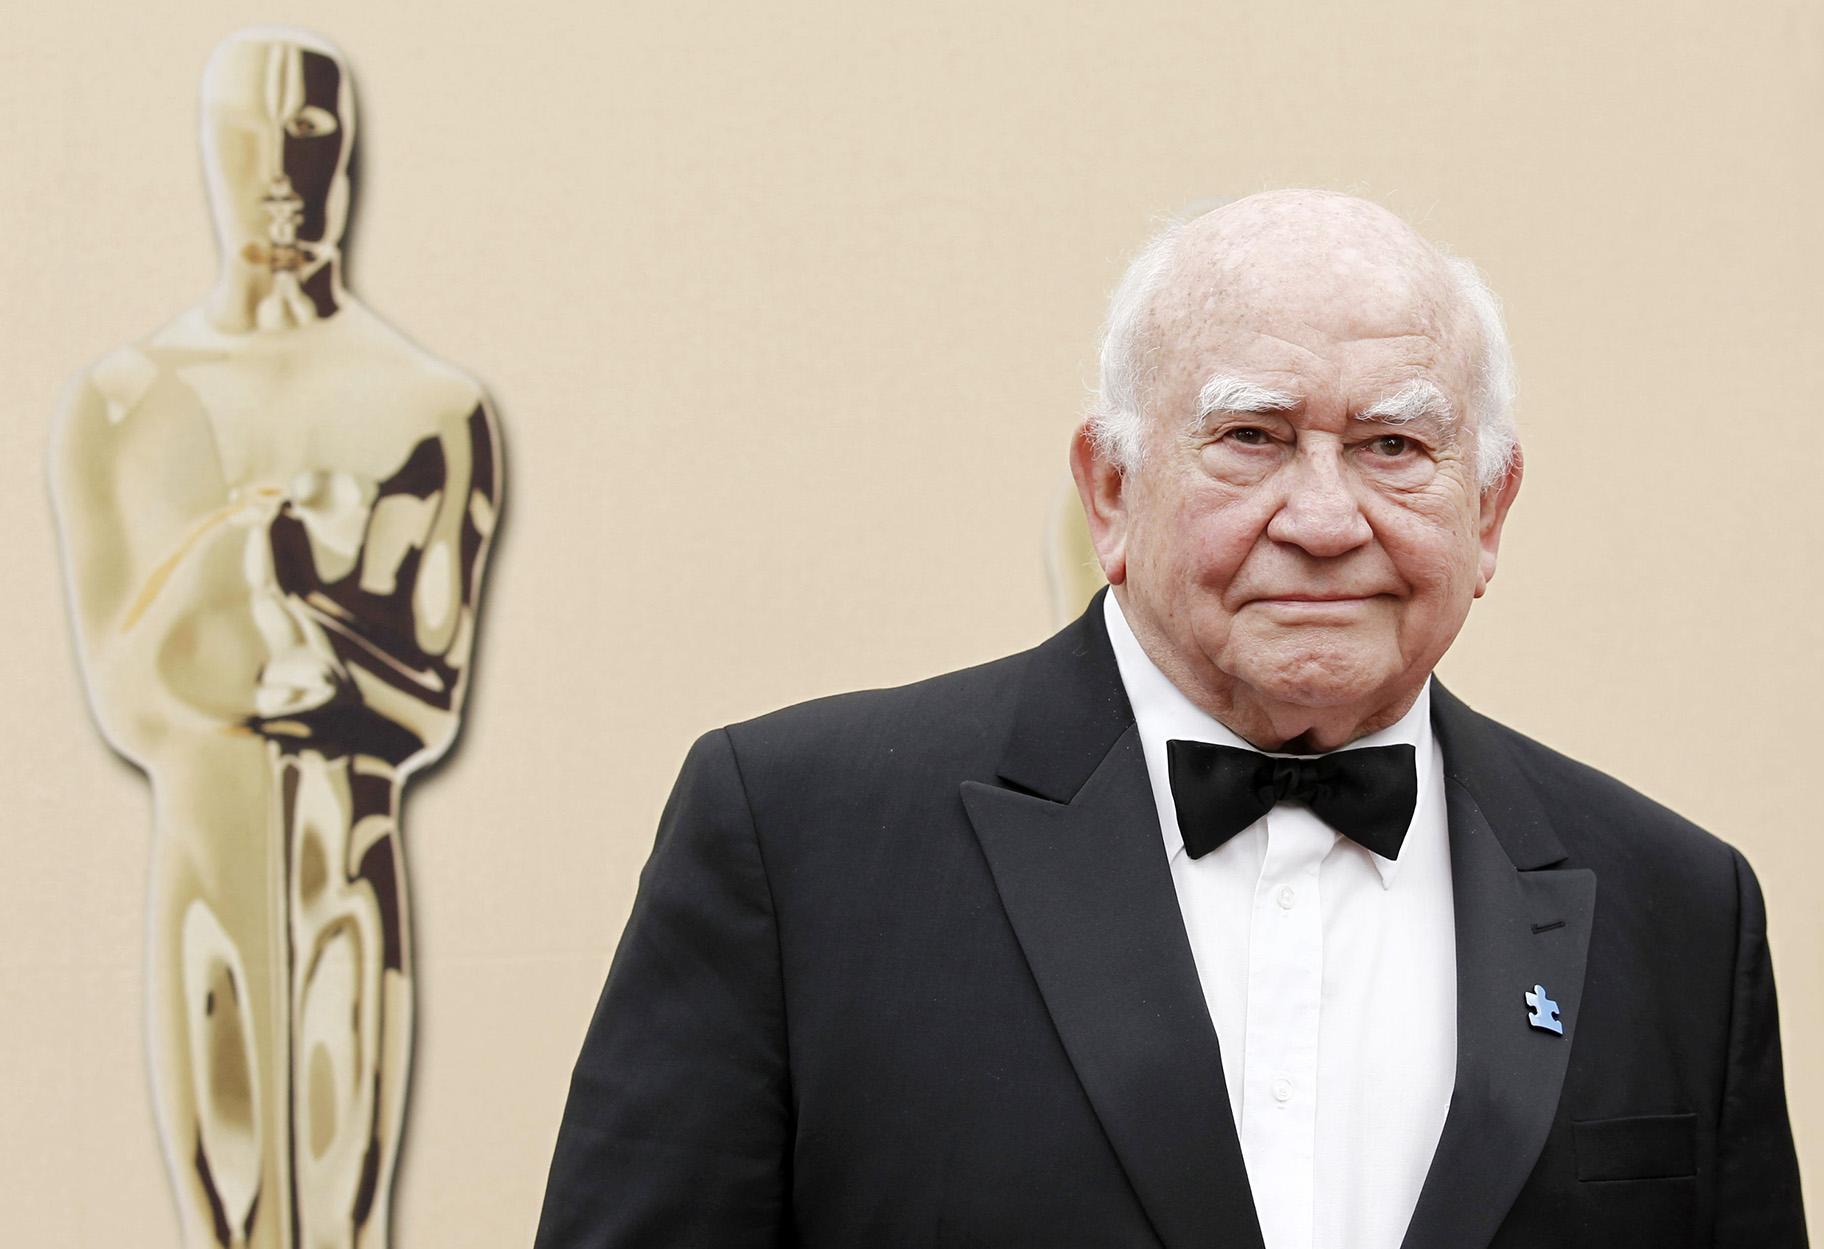 In this March 7, 2010, file photo, actor Ed Asner arrives during the 82nd Academy Awards in the Hollywood section of Los Angeles. (AP Photo / Matt Sayles, File)